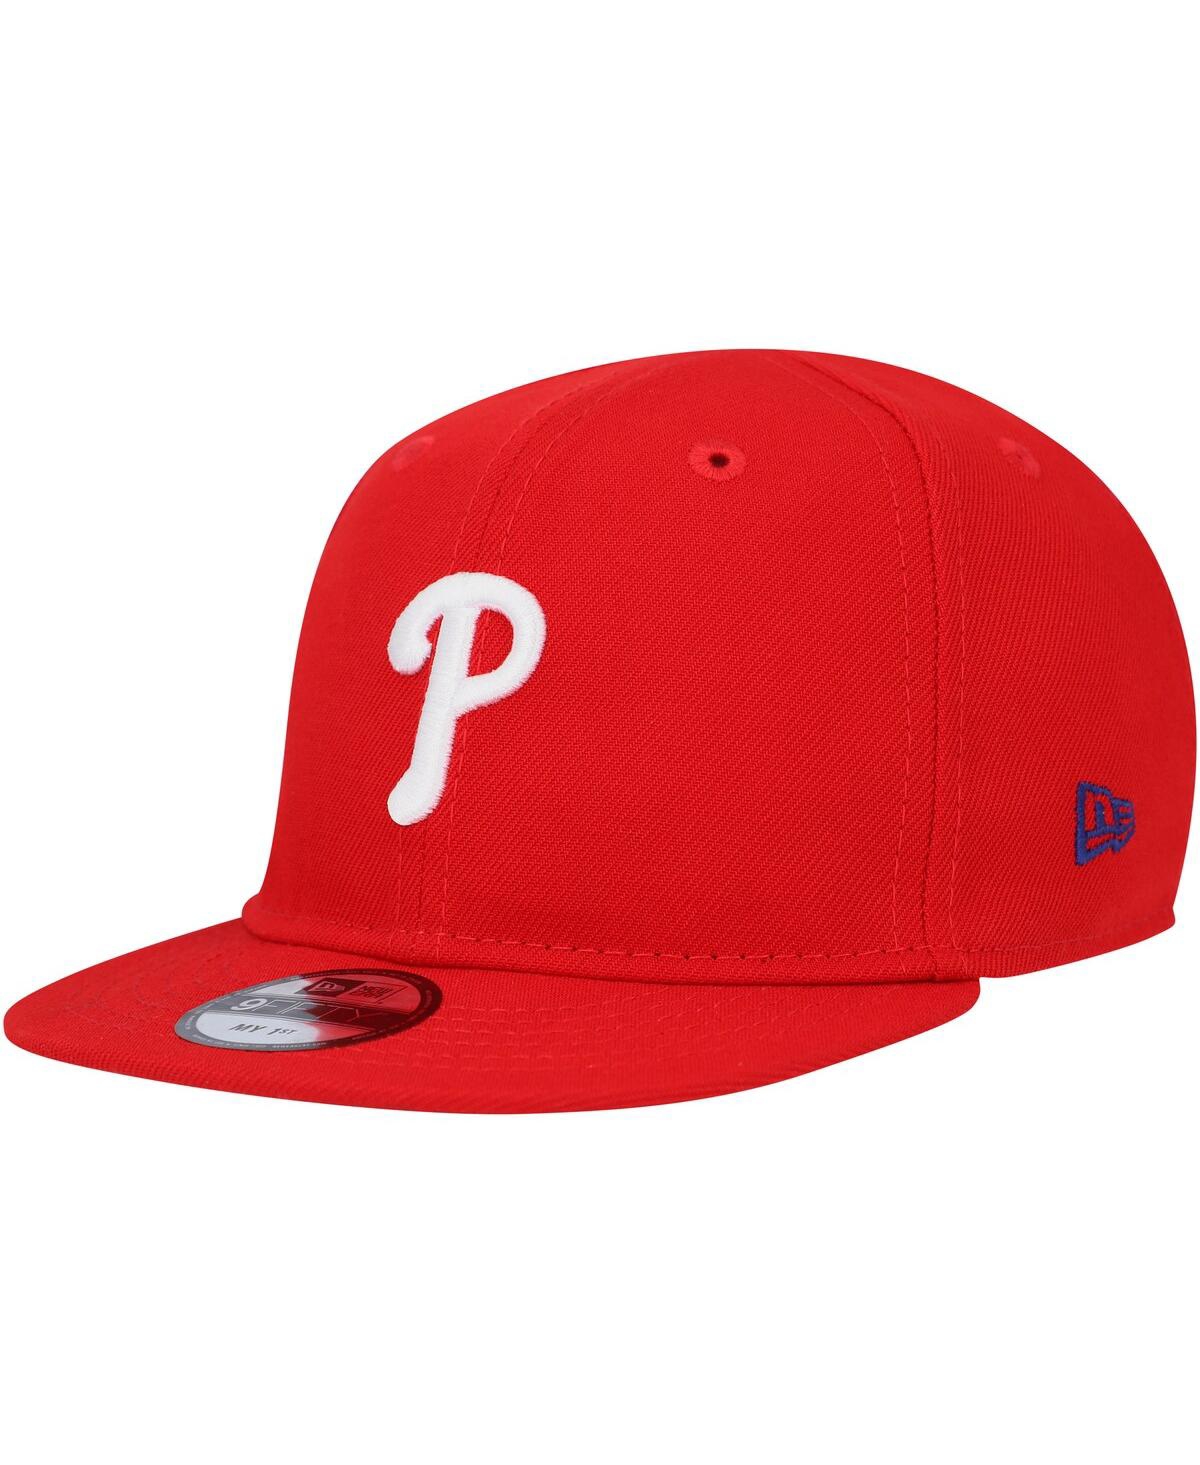 New Era Babies' Infant Boys And Girls  Red Philadelphia Phillies My First 9fifty Adjustable Hat